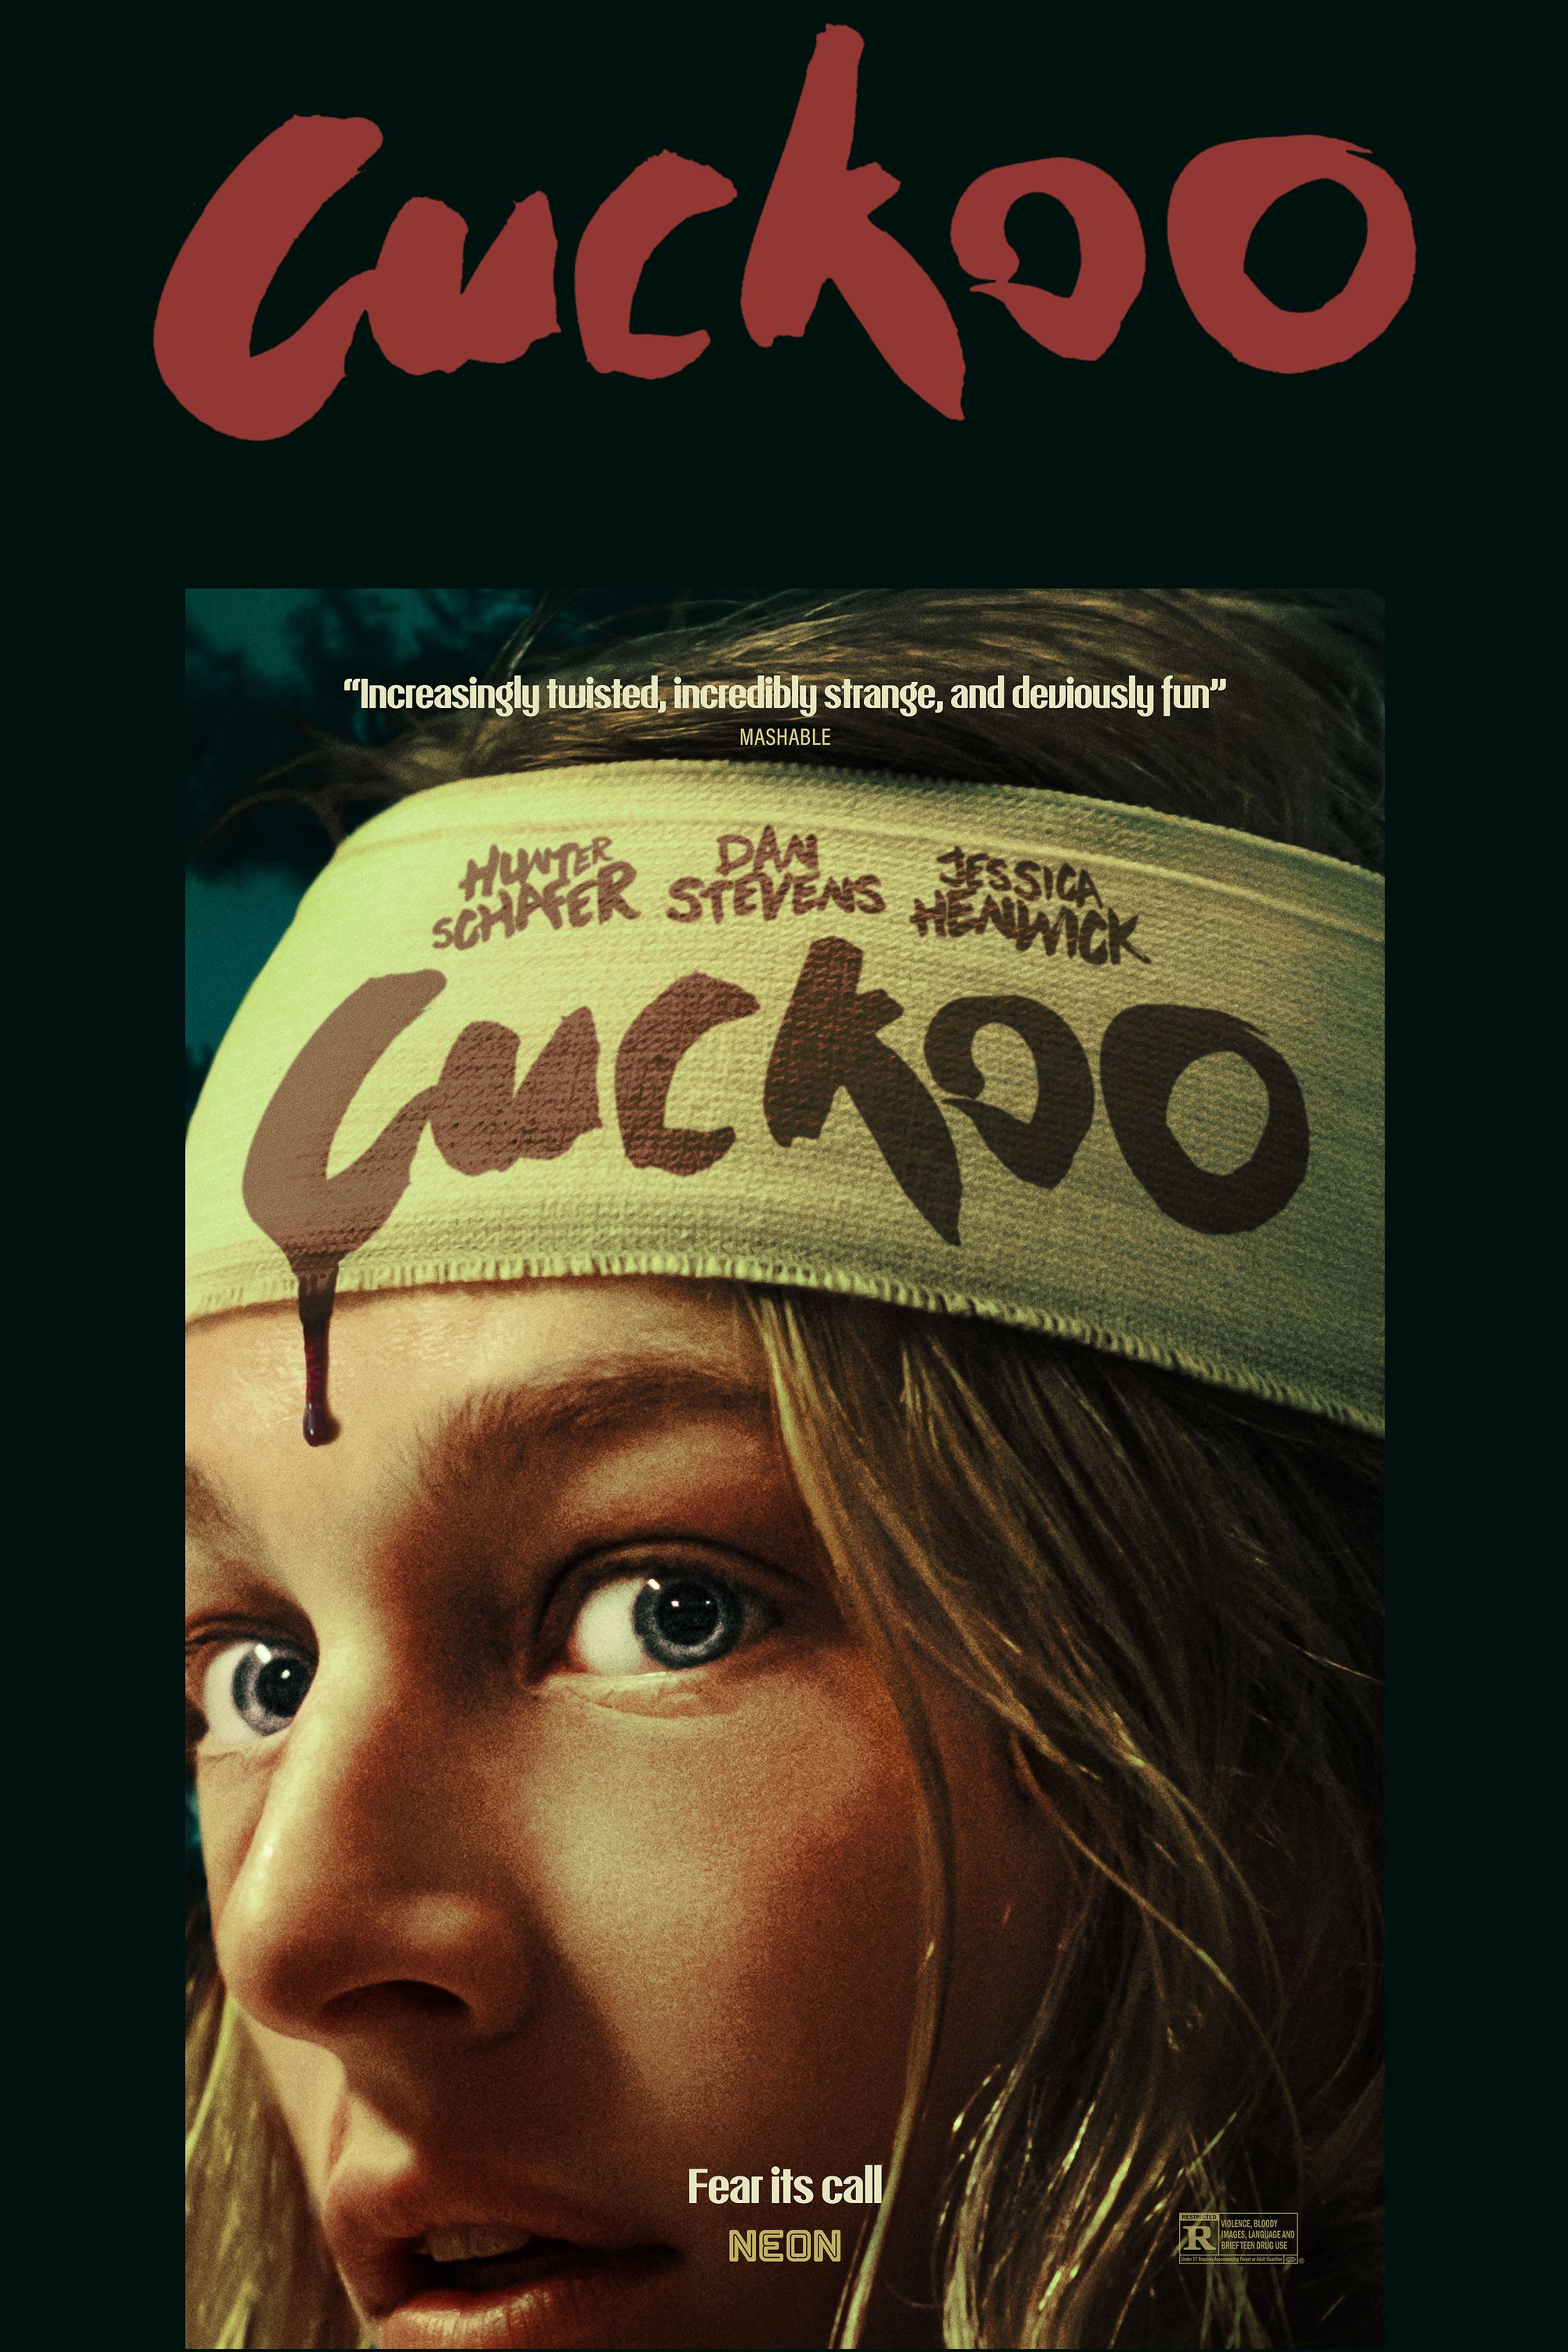 Cuckoo Movie Poster Showing a Woman with a Bloody Head Bandage